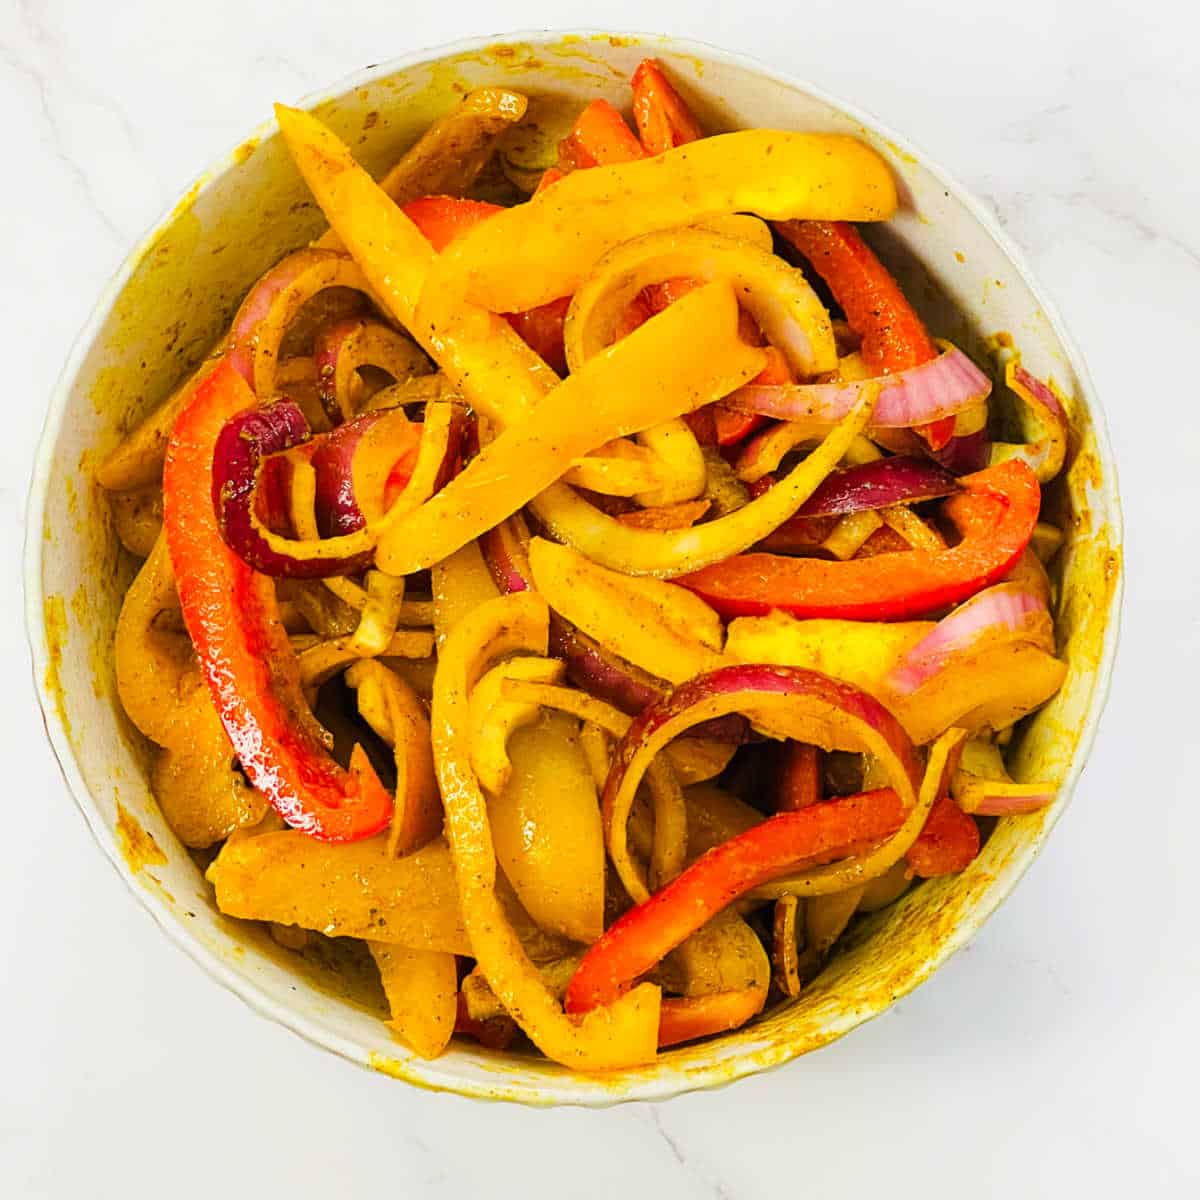 Seasoned bell peppers in a bowl.